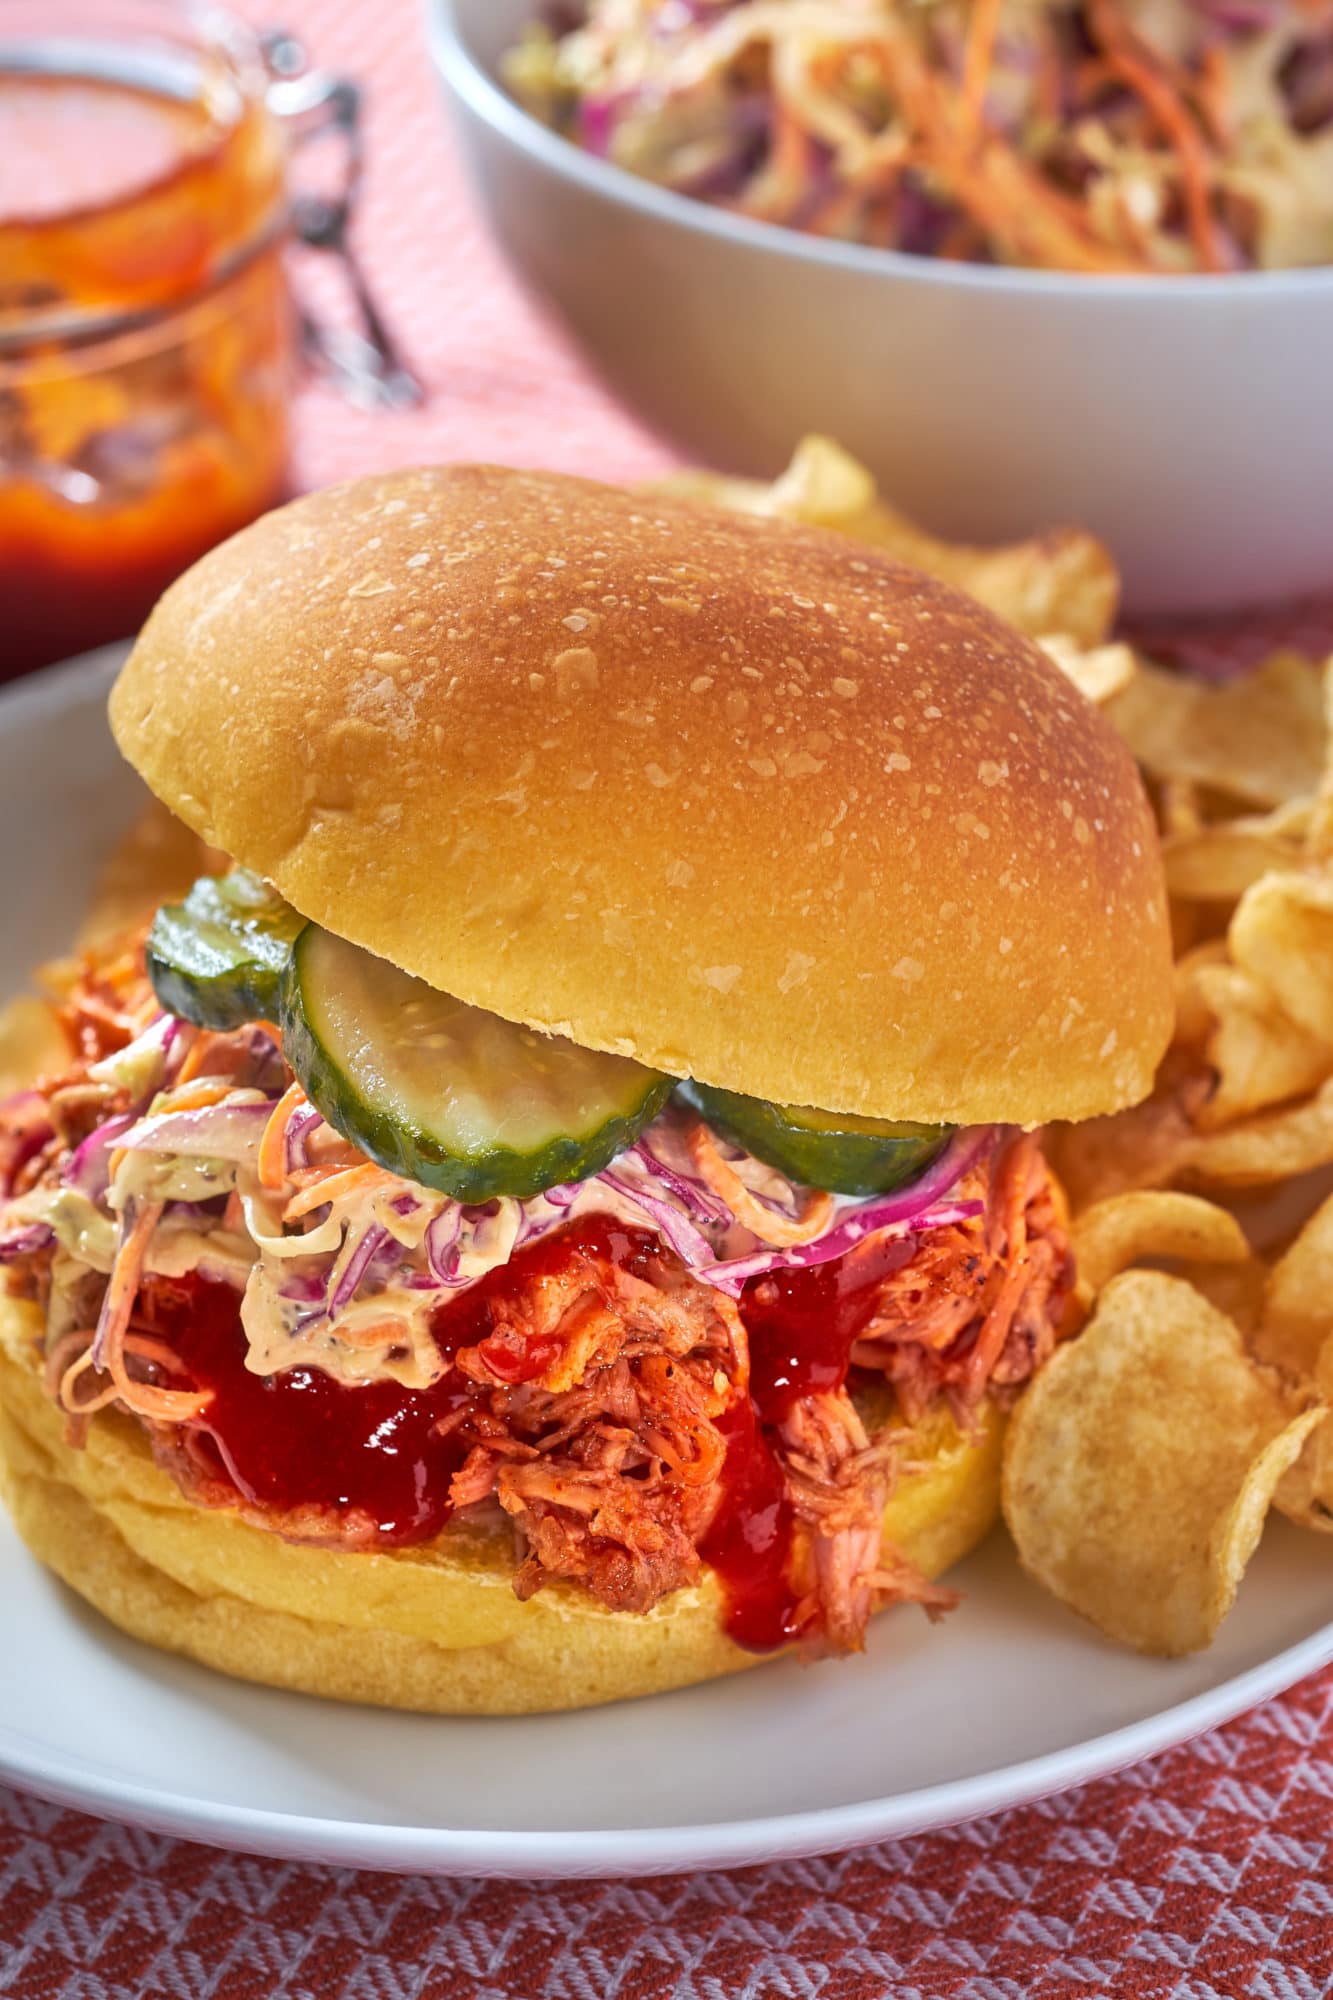 Pulled Pork Sandwich with Coleslaw